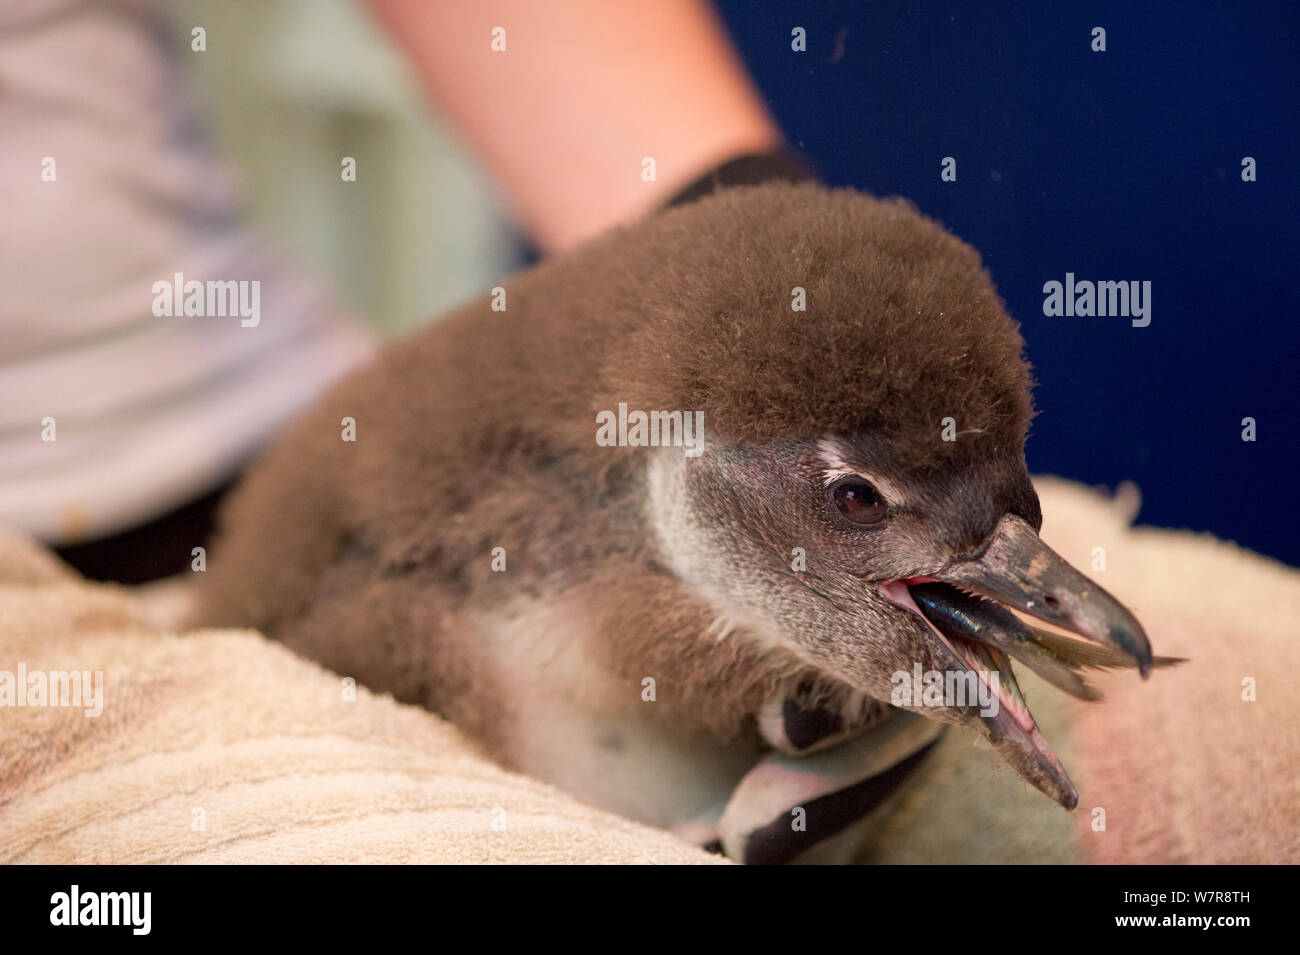 African penguin (Spheniscus demersus) chick, eating whole fish, part of Chick Bolstering Project, Southern African Foundation for the Conservation of Coastal Birds (SANCCOB), South Africa. Captive, May 2012 Stock Photo